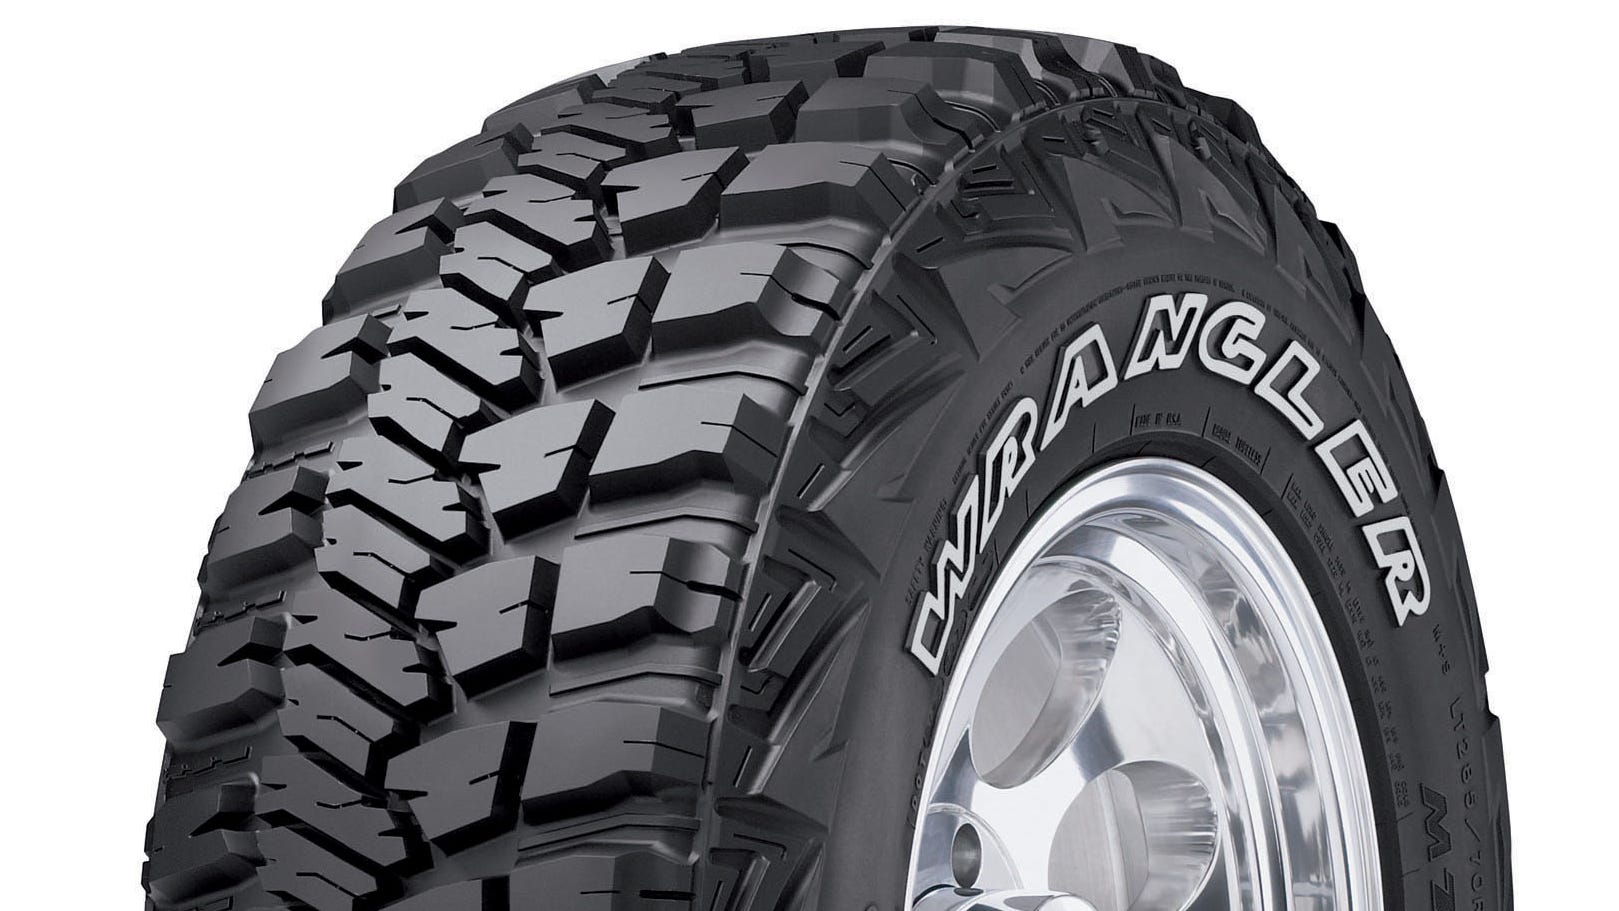 Goodyear 'Wrangler' label stopped in tracks for new Ford Bronco